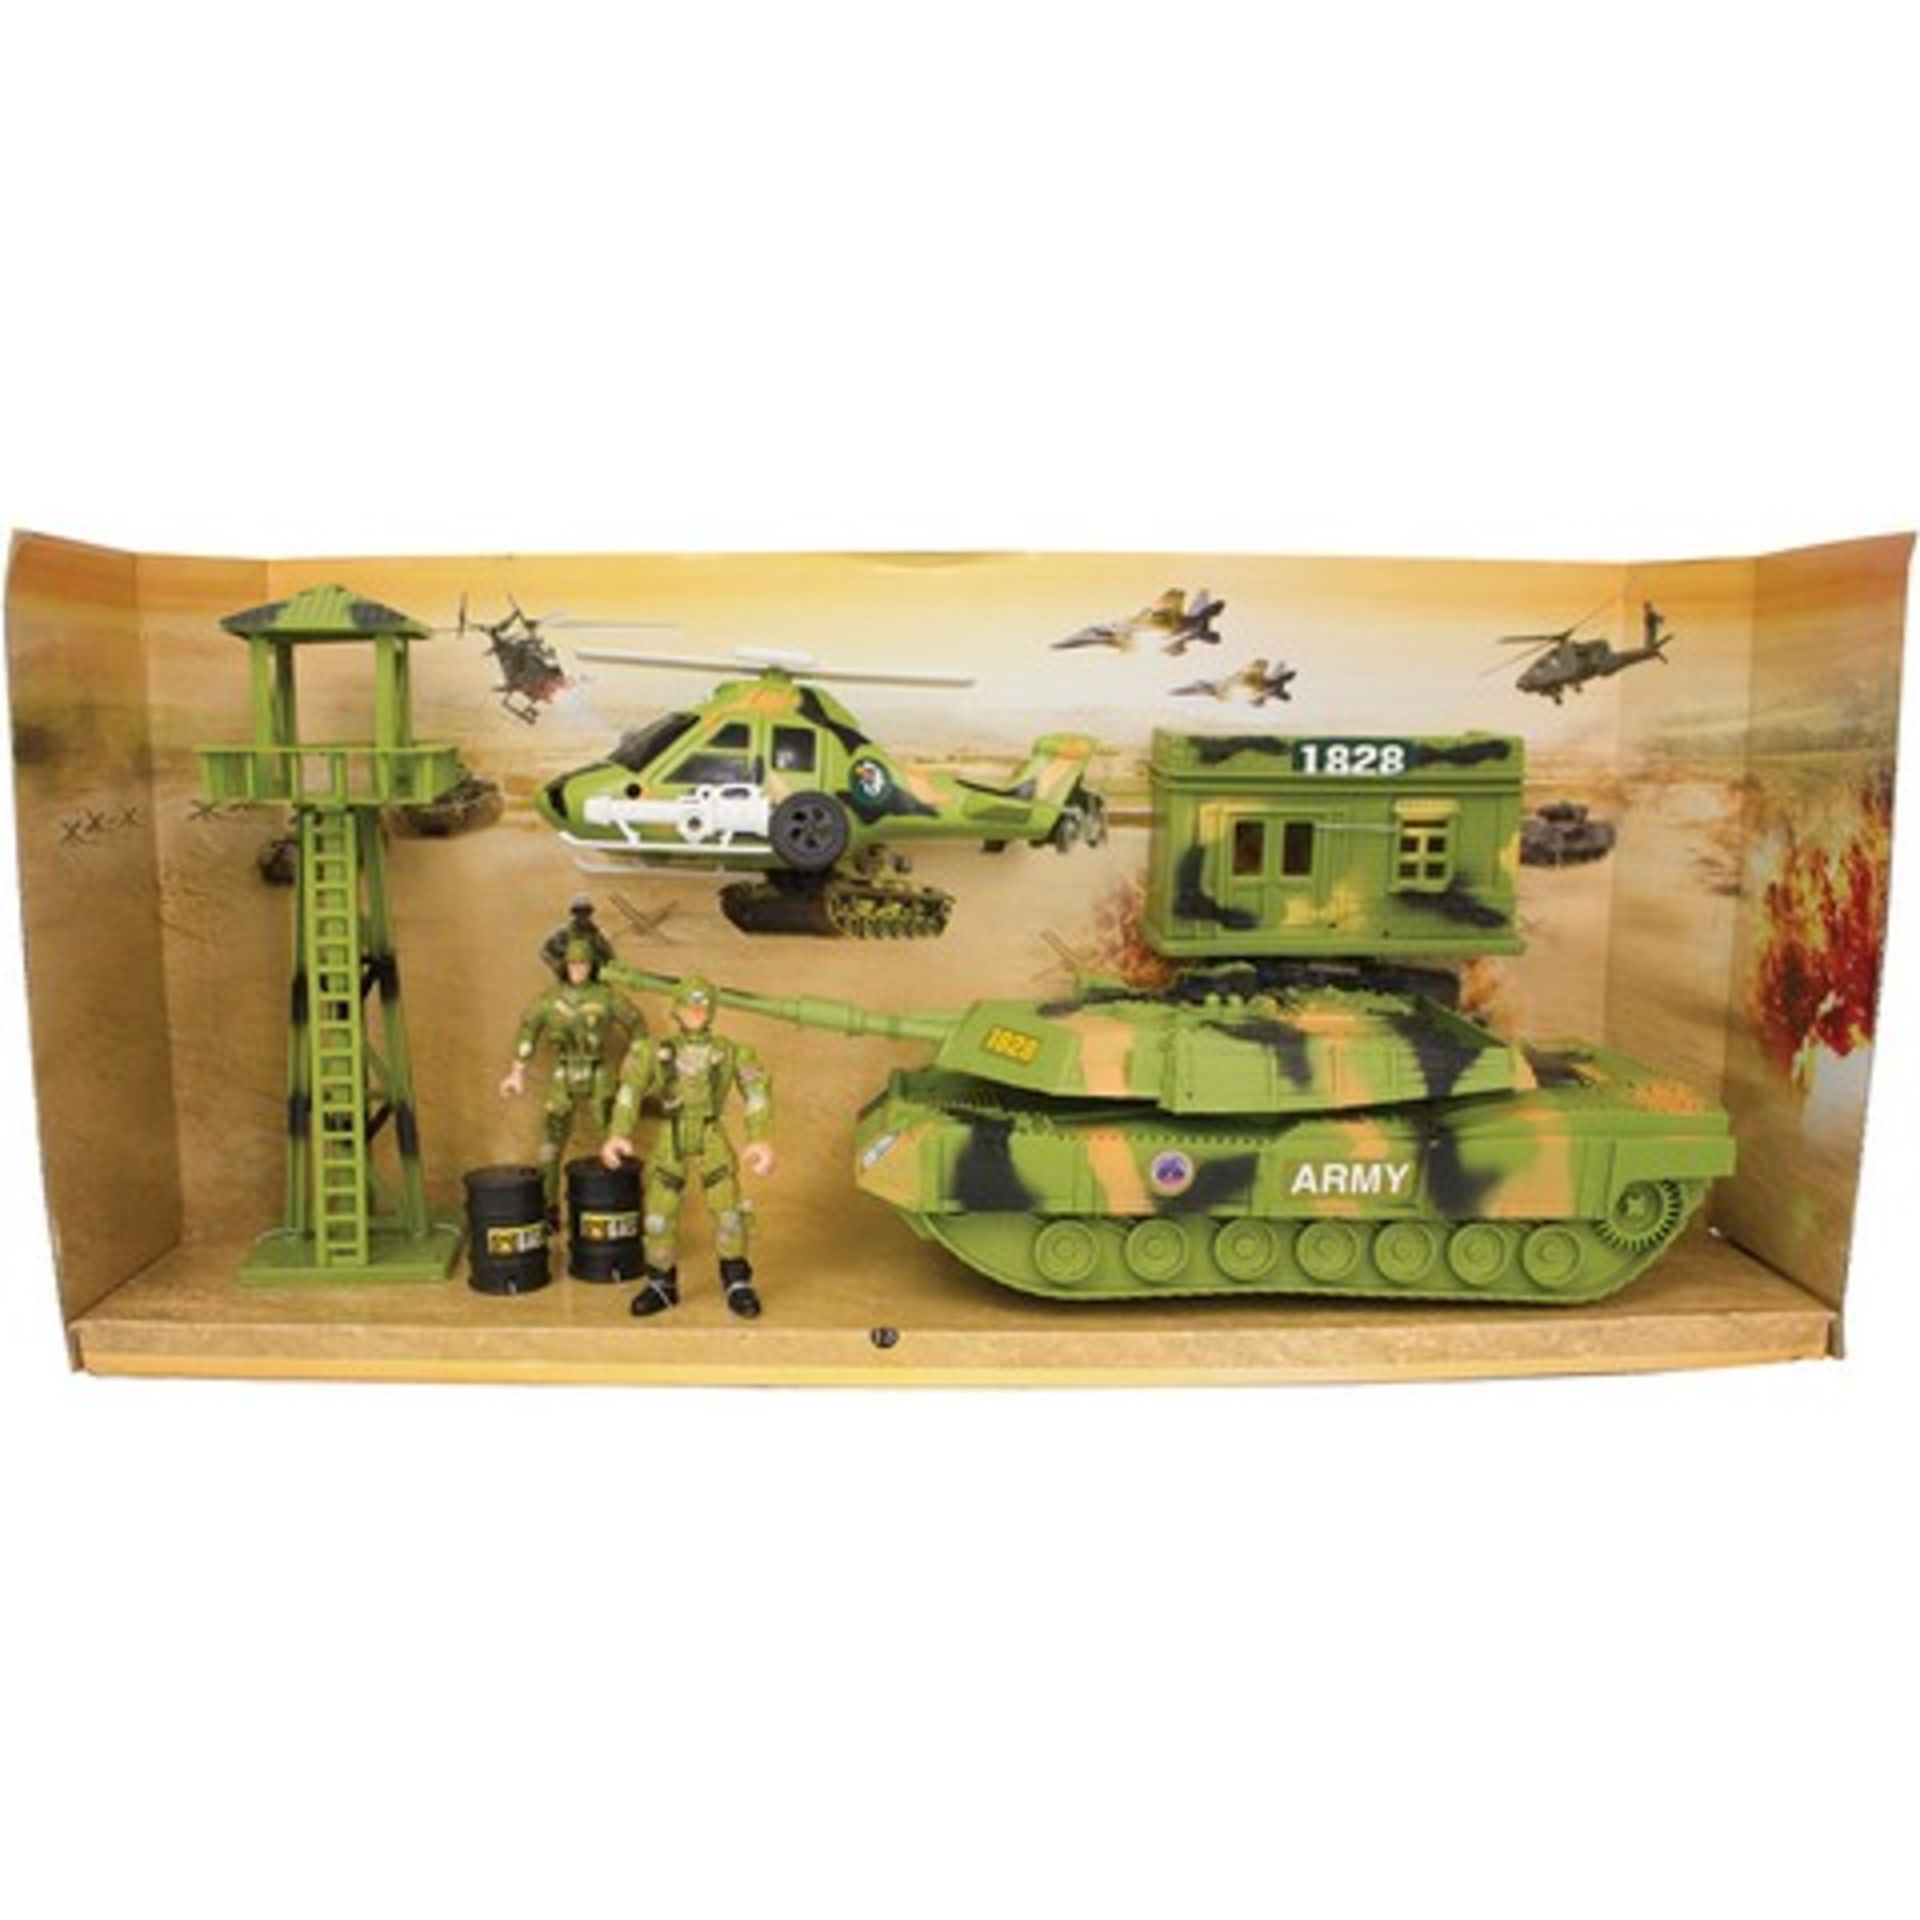 + VAT Brand New Military Operation Action Play Set Including 2 Soldiers - Look-Out Tower -